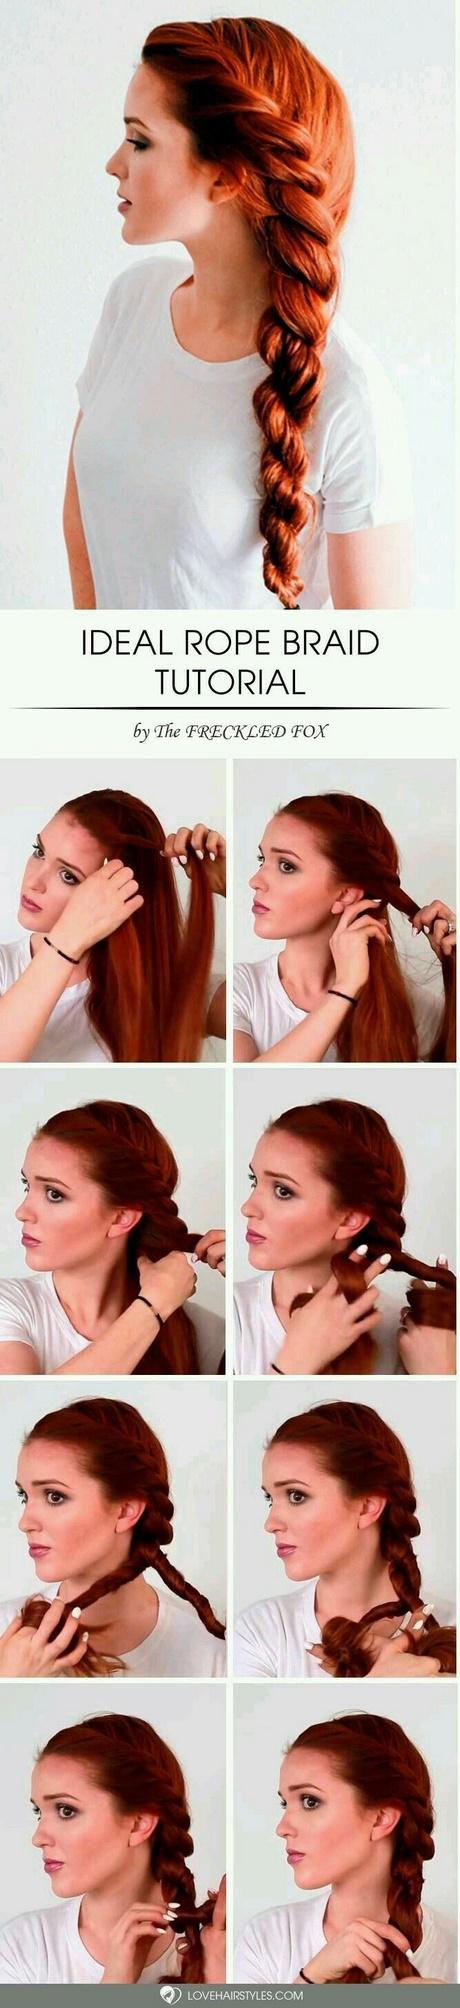 Normal everyday hairstyles normal-everyday-hairstyles-26_3